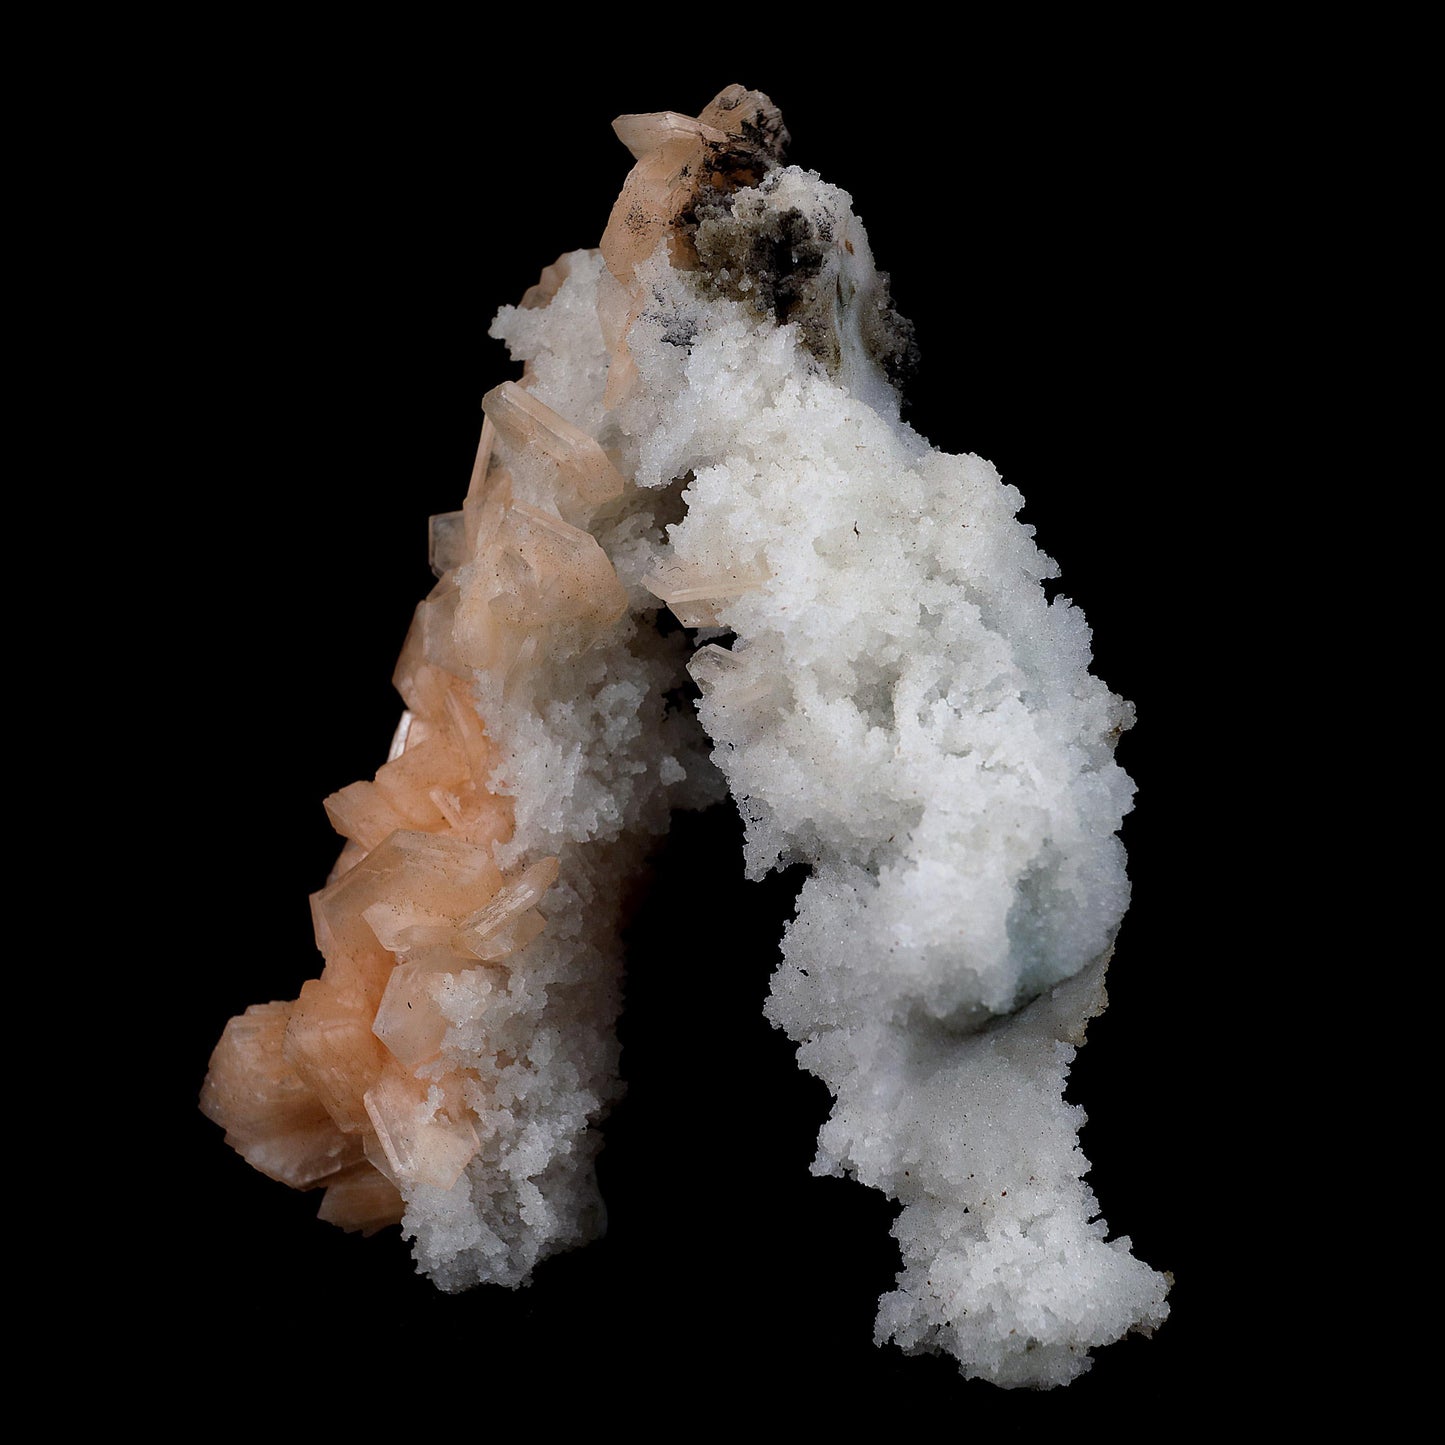 Stilbite with Chalcedony 'V' Formation Natural Mineral Specimen # B 39…  https://www.superbminerals.us/products/stilbite-with-chalcedony-v-formation-natural-mineral-specimen-b-3973  Features This intricate Chalcedony stalactite hosts red-peach Stilbite and beautifully smaller gemmy Stilbite crystal on a another part of Chalcedony contrasting matrix.&nbsp; Endless fractal adventures await! Primary Mineral(s):&nbsp; Stilbite Secondary Mineral(s): N/AMatrix: Chalcedony14 cm x 10 cm345 Gms